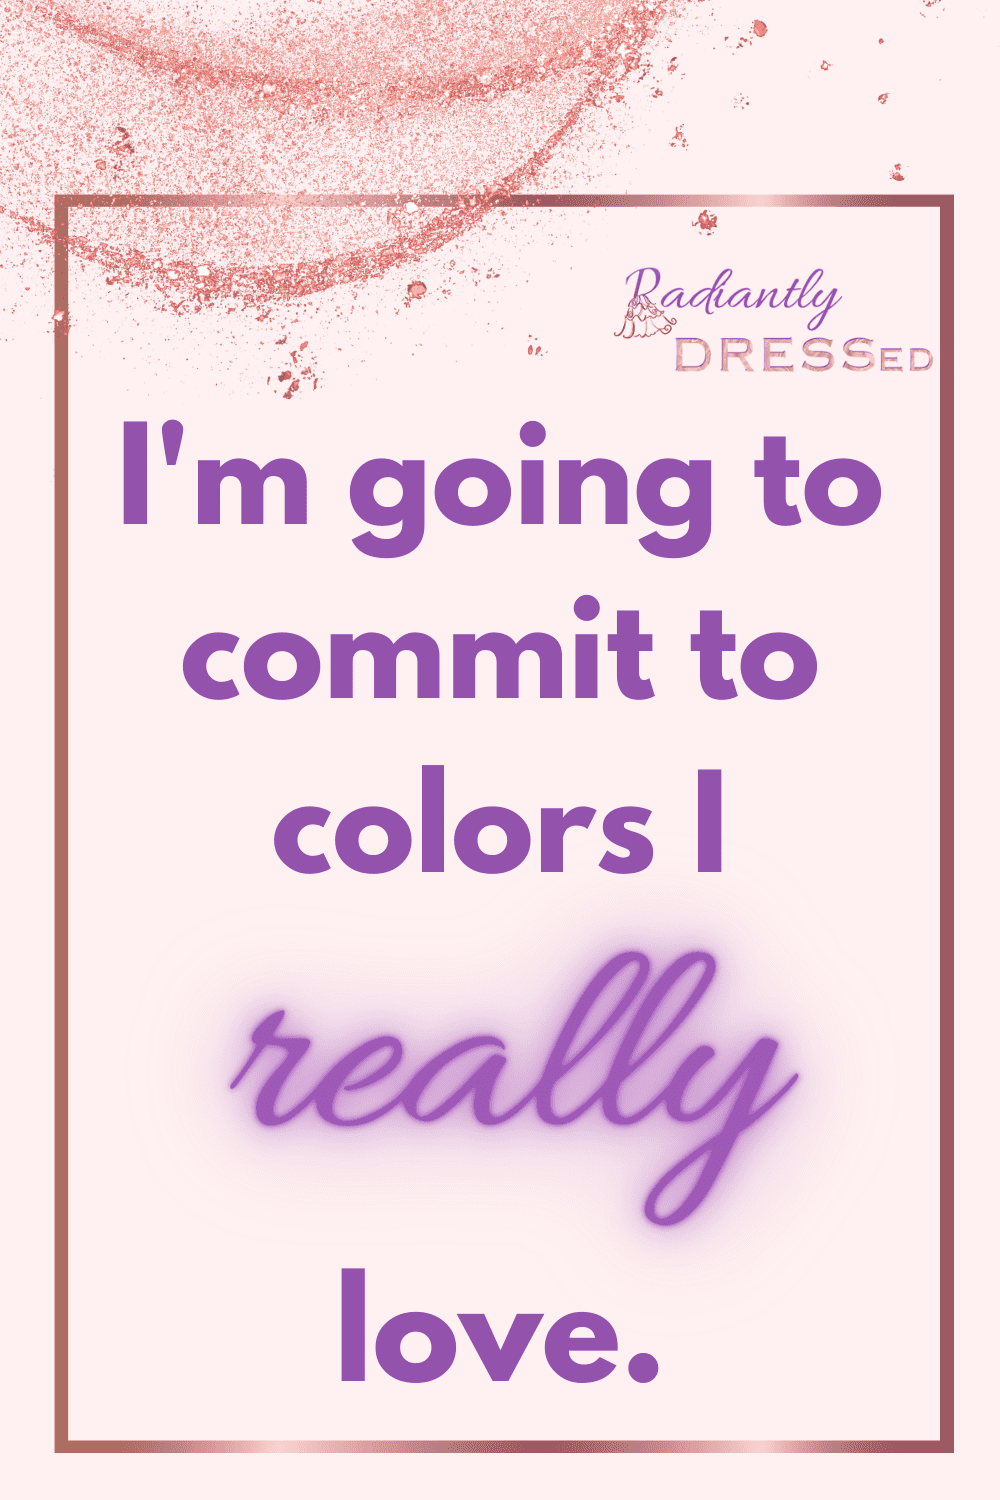 commit to colors